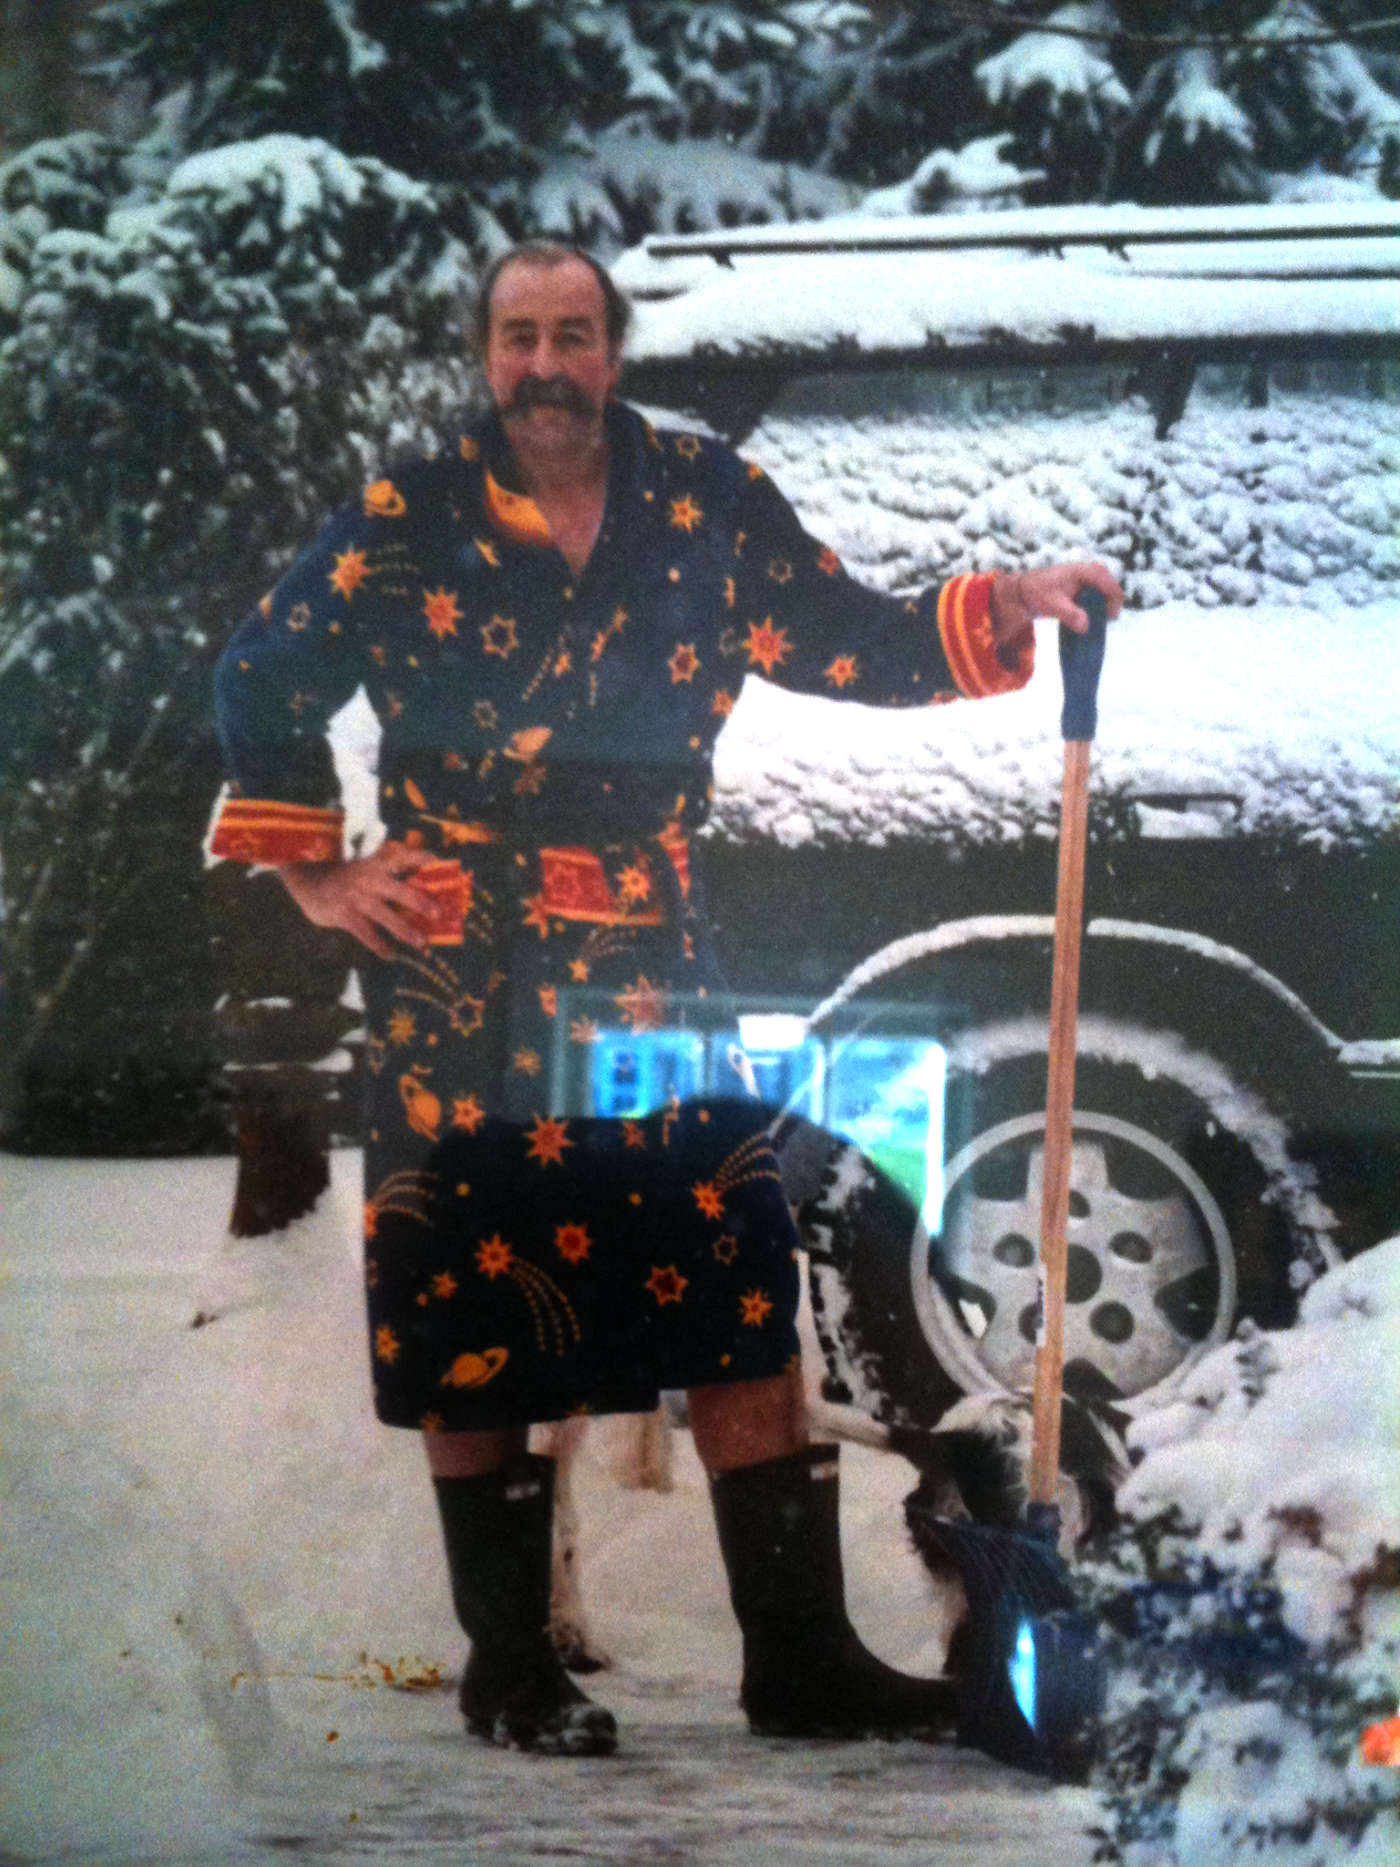 Bruce Nadel in his classic wizard robe shoveling snow in his fireman's boots.